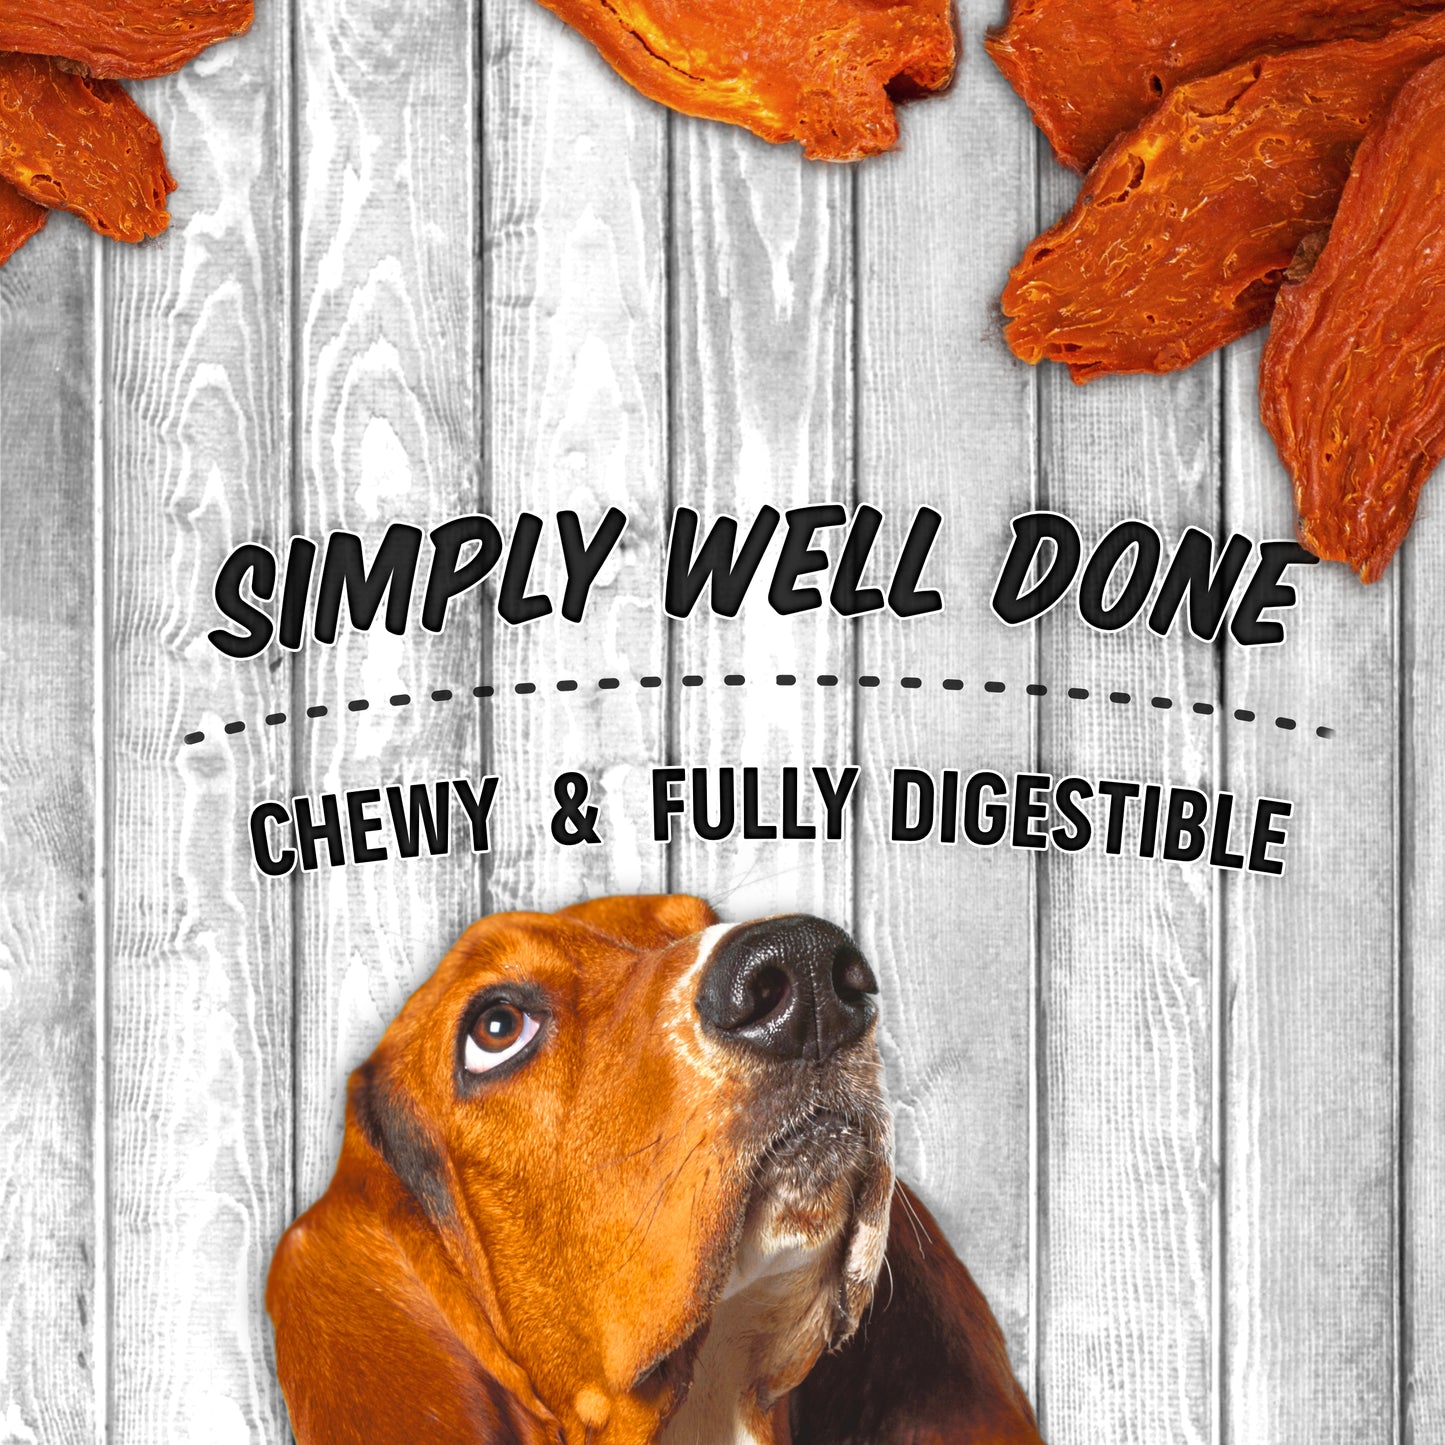 Dog looking up at sweet potato slices. "simply well done"